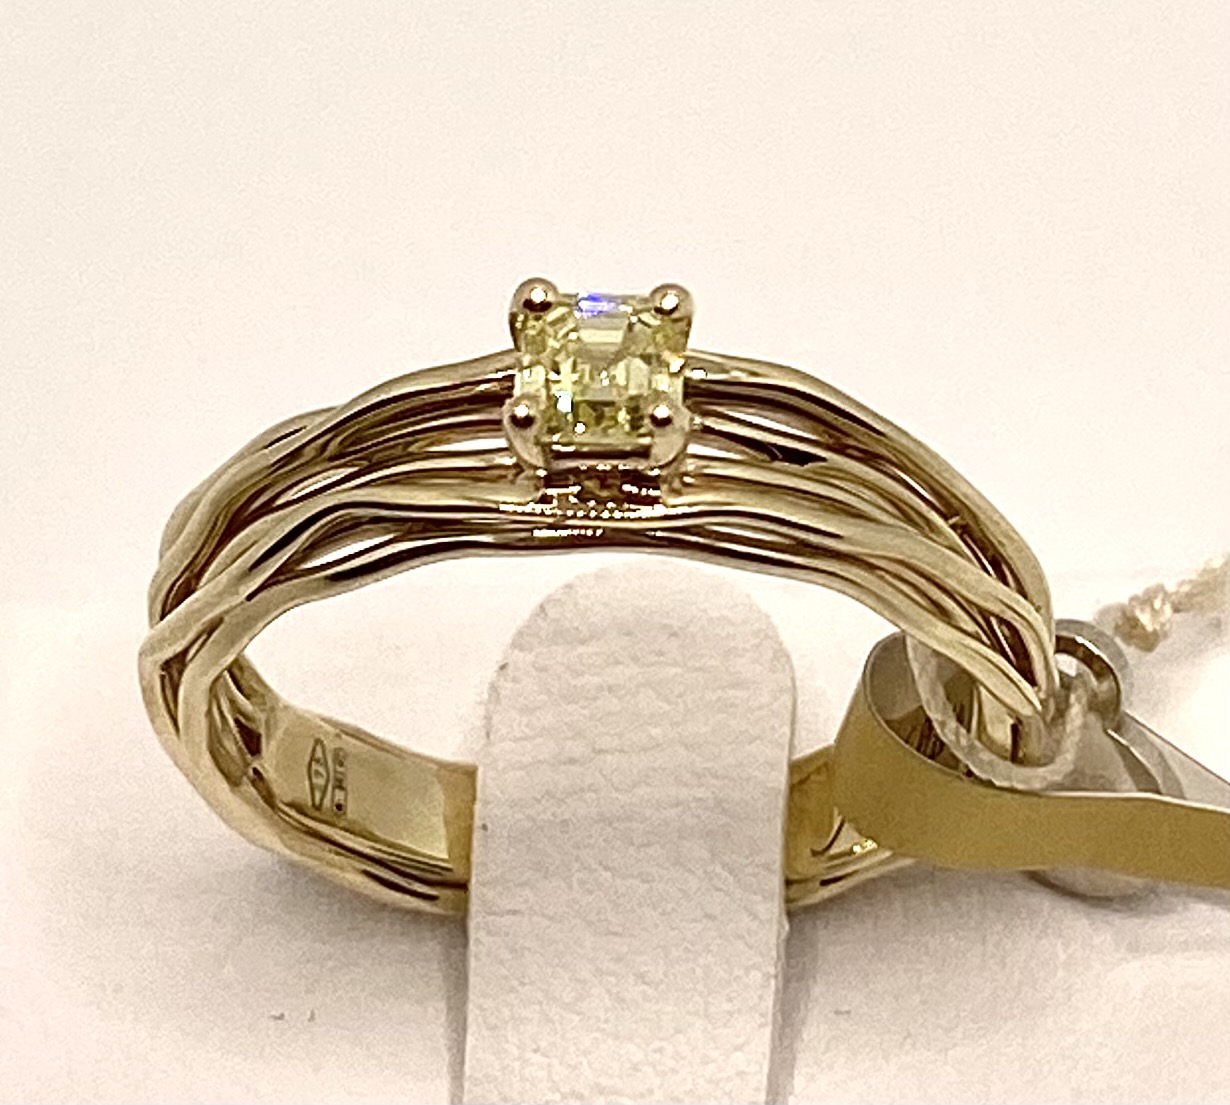 Solitaire 7-wire screwdriver in 9kt Yellow Gold with 0.26ct S1 Natural Fancy Yellow Diamond